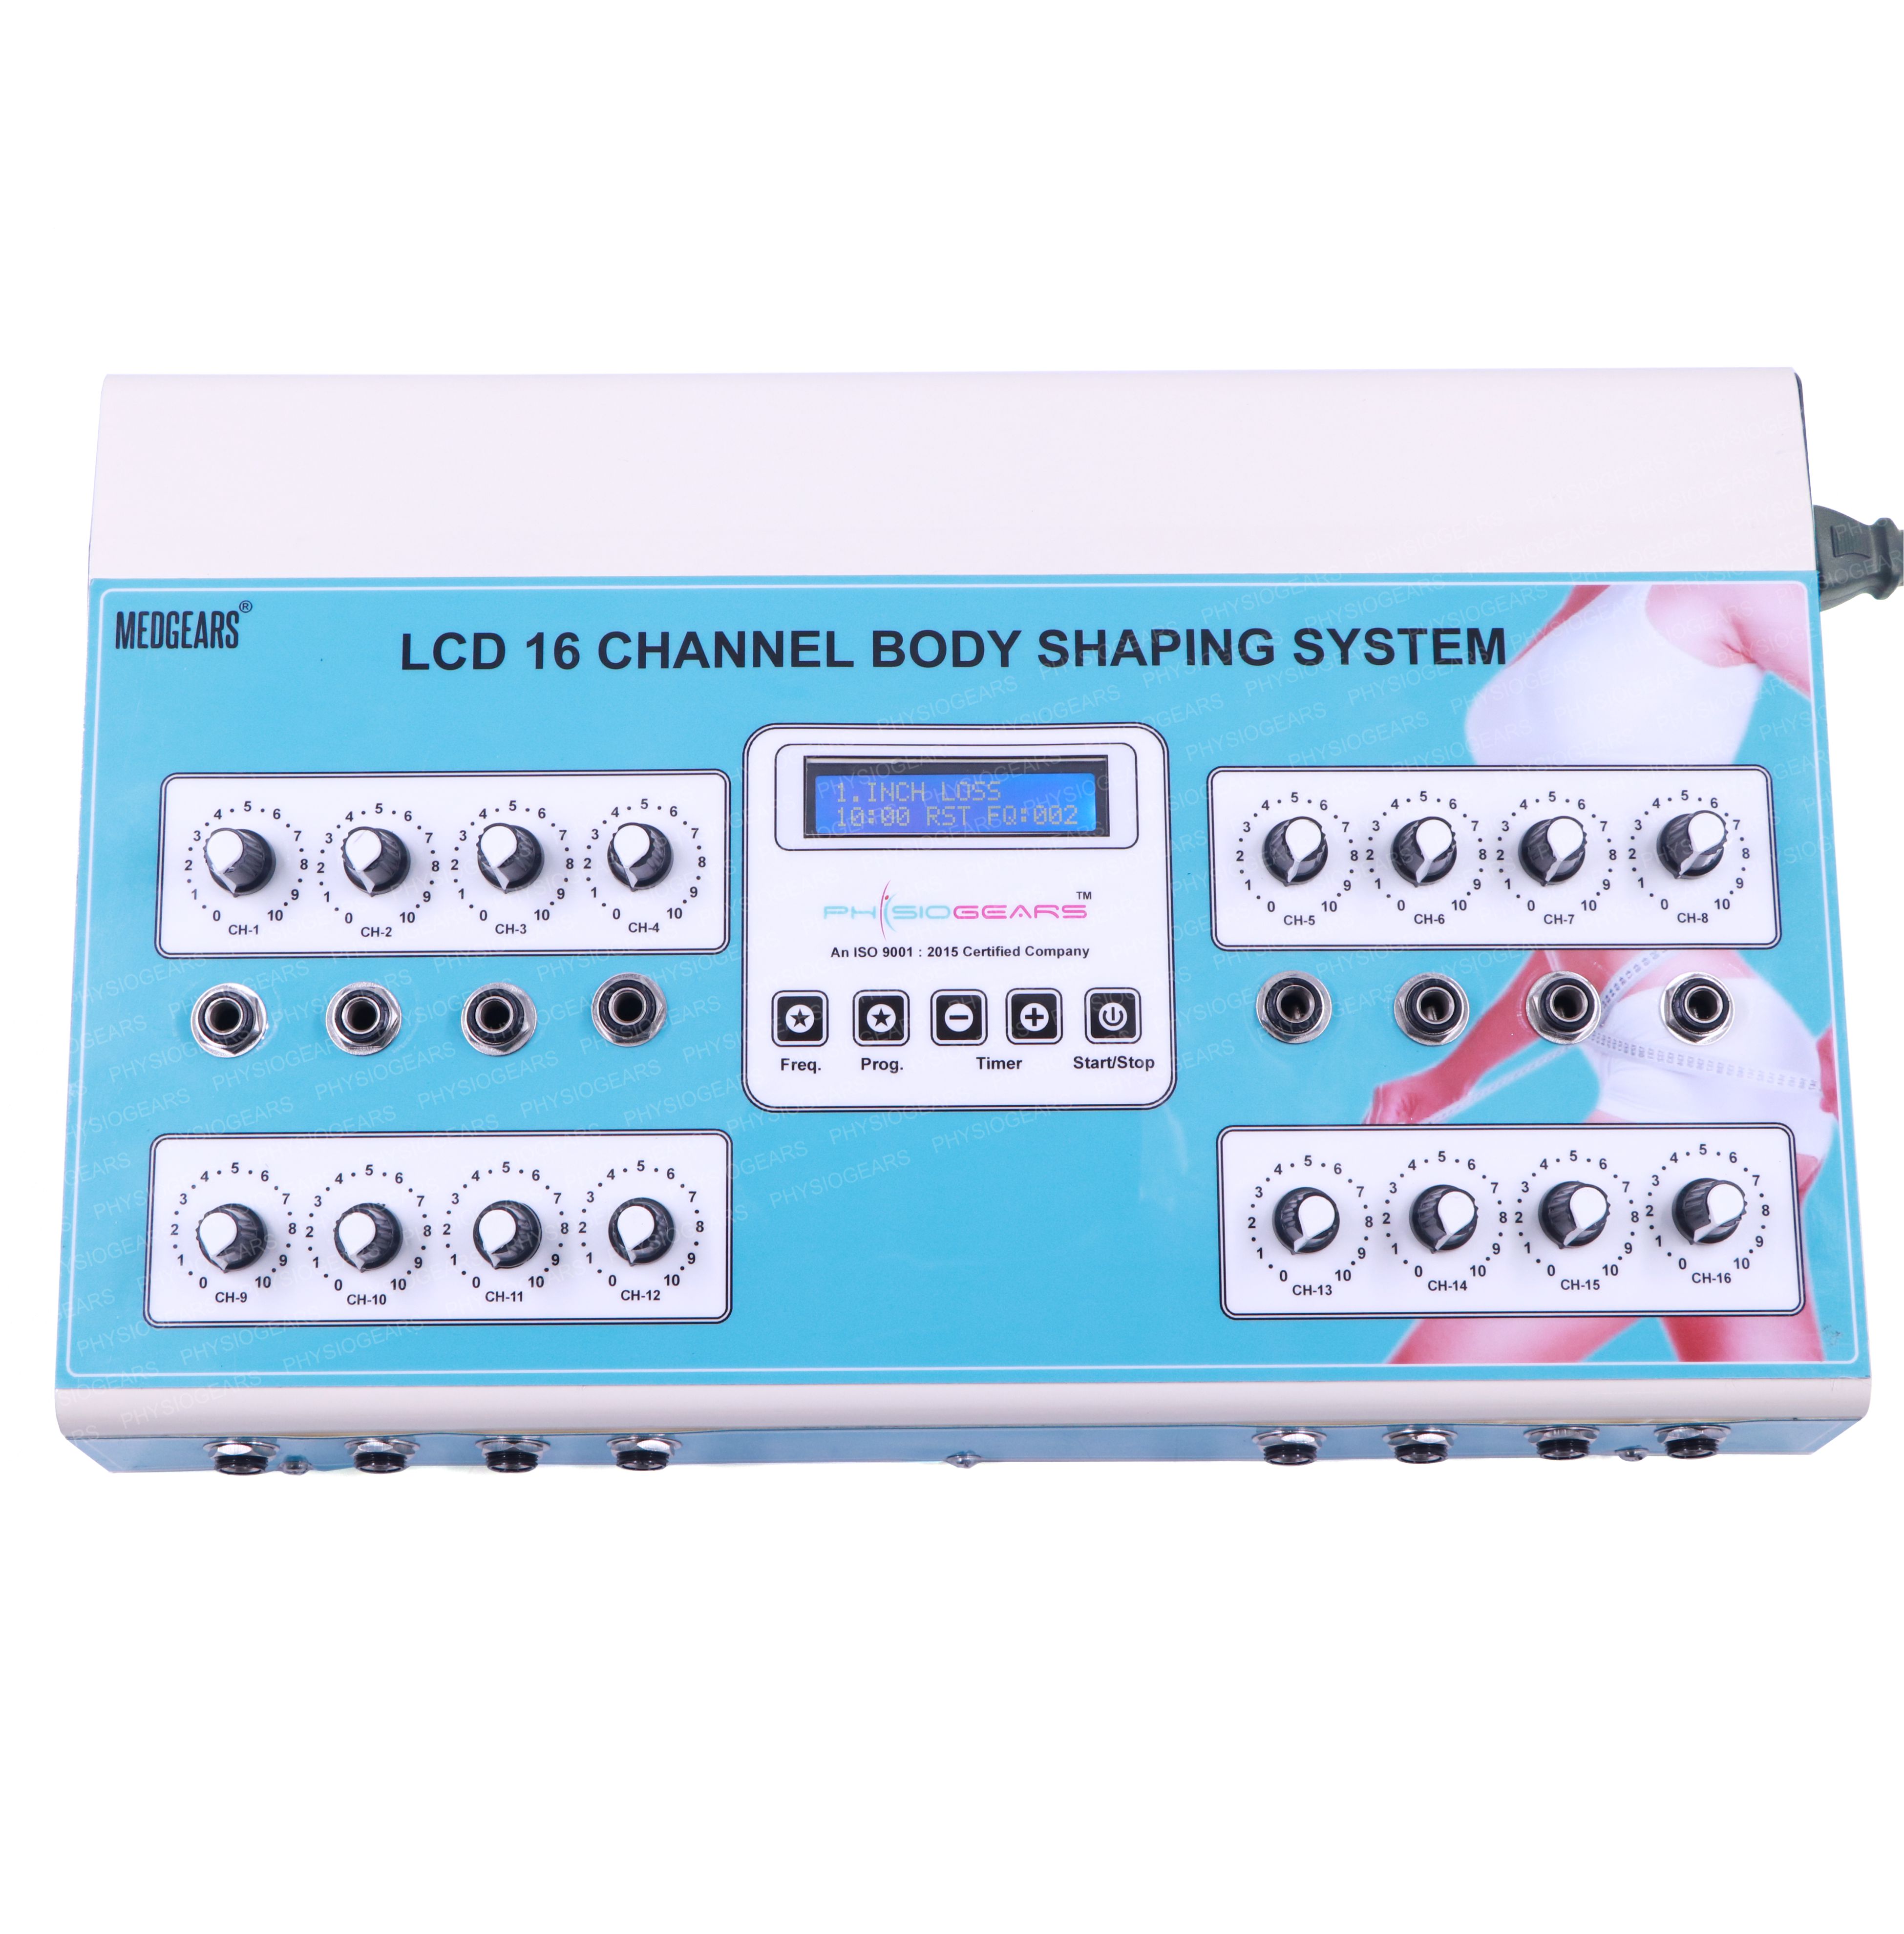  16 CHANNEL SLIMMING